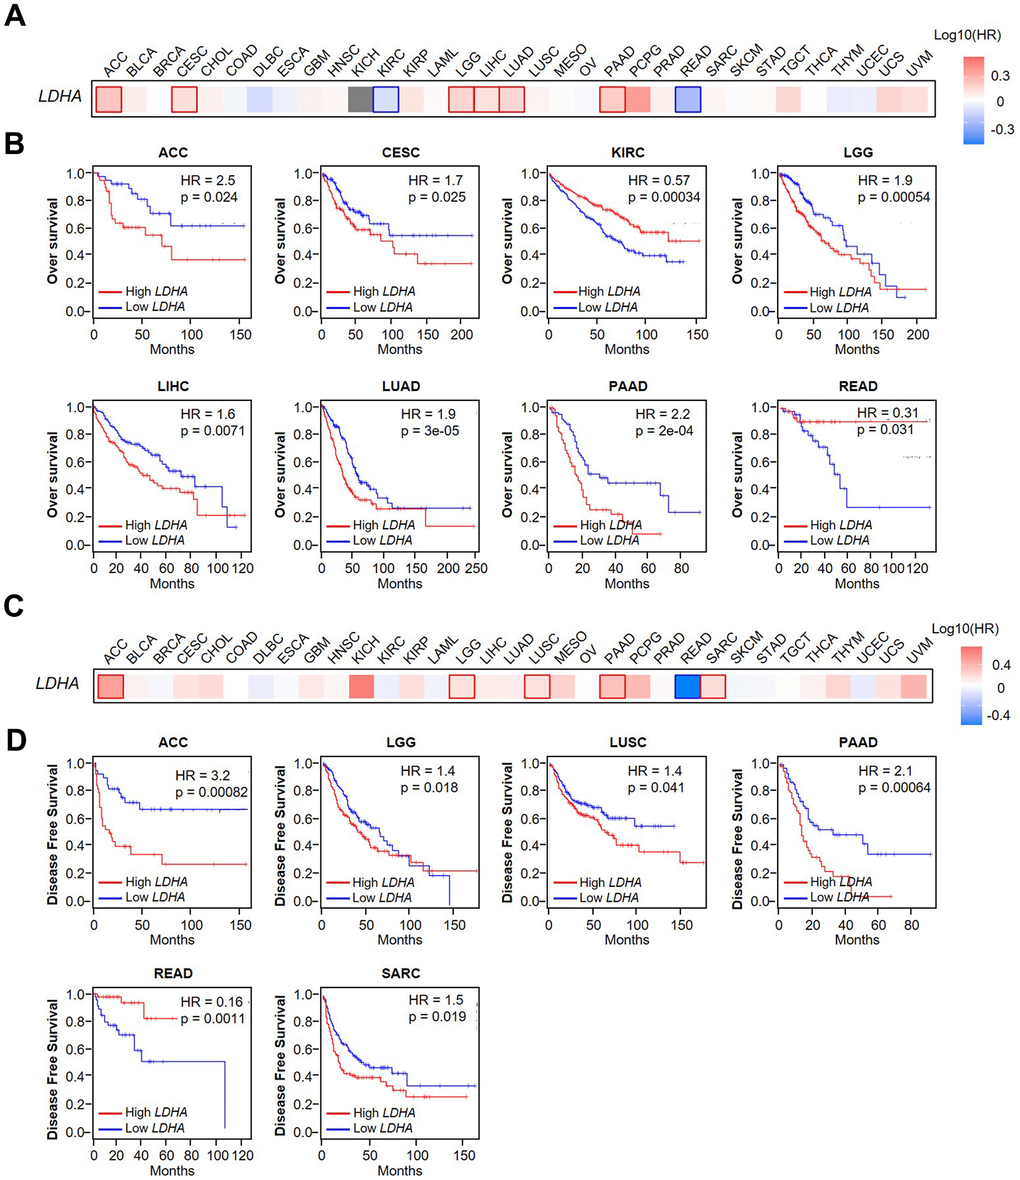 Correlation between LDHA expression and overall survival and disease-free survival in patients with different cancer types. (A) Using GEPIA2 to construct an overall survival (OS) map of LDHA expression. (B) Kaplan–Meier survival curves (OS) of patients with high or low LDHA expression in multiple human cancers (ACC, CESC, KIRC, LGG, LIHC, LUAD, PAAD, READ). (C) Using GEPIA2 to construct a disease-free survival (DFS) map of LDHA expression. (D) Kaplan–Meier survival curves (DFS) of patients with high or low LDHA expression in multiple human cancers (ACC, LGG, LUSC, PAAD, READ, SARC). The expression of LDHA was distinguished by different color lines. Red lines indicated high expression, and blue lines indicated low expression.